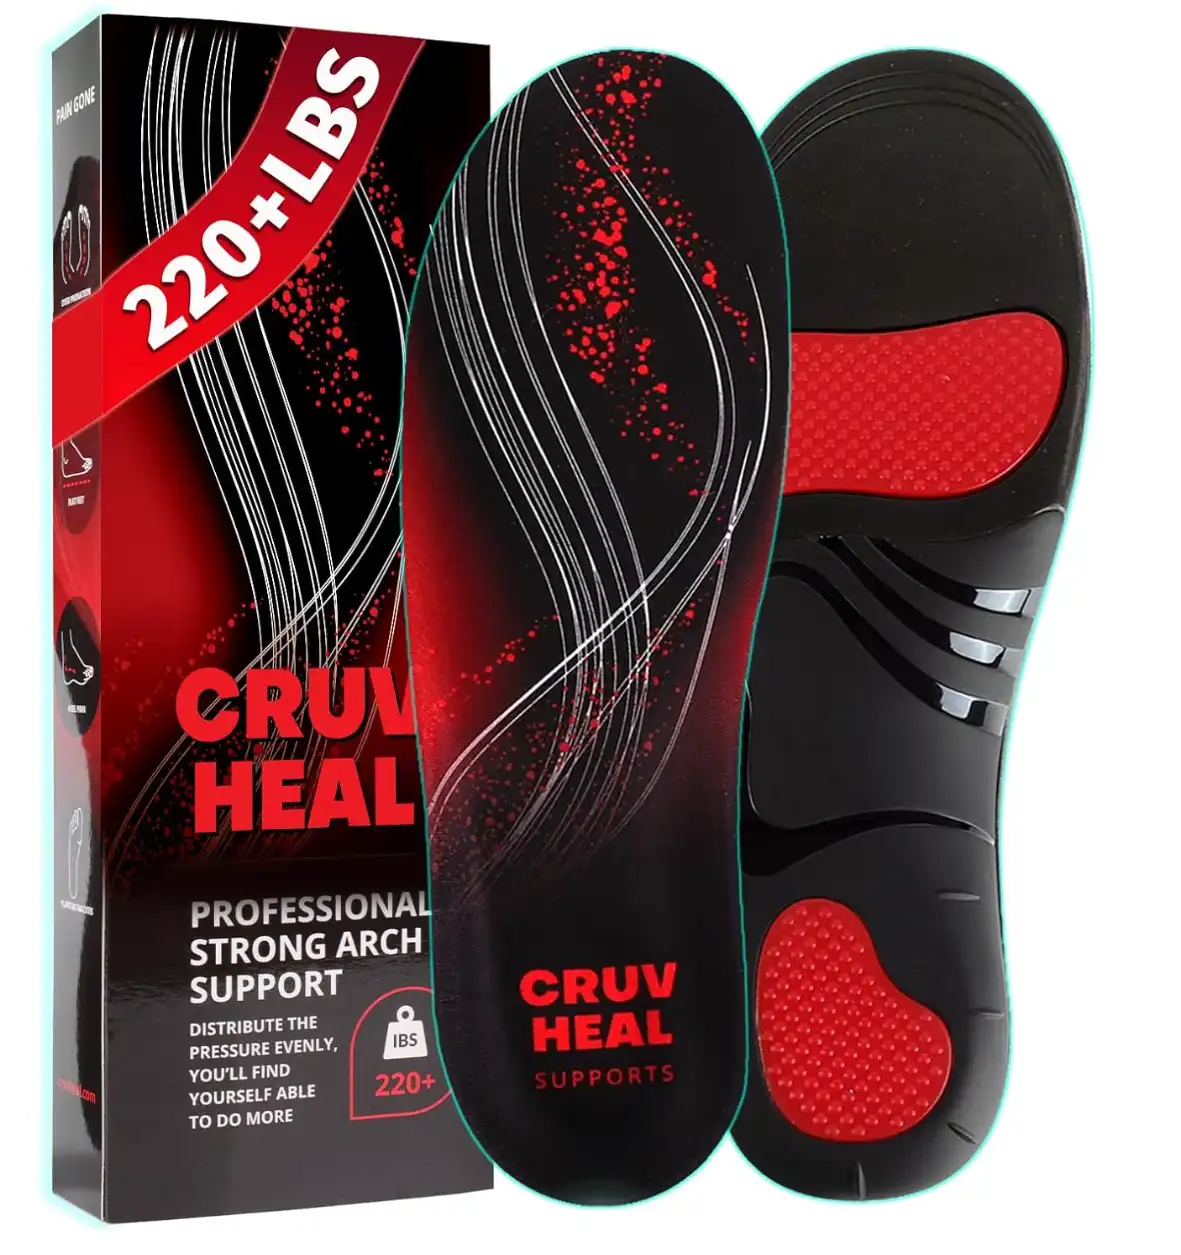  knee pain relief insoles-cruveheal